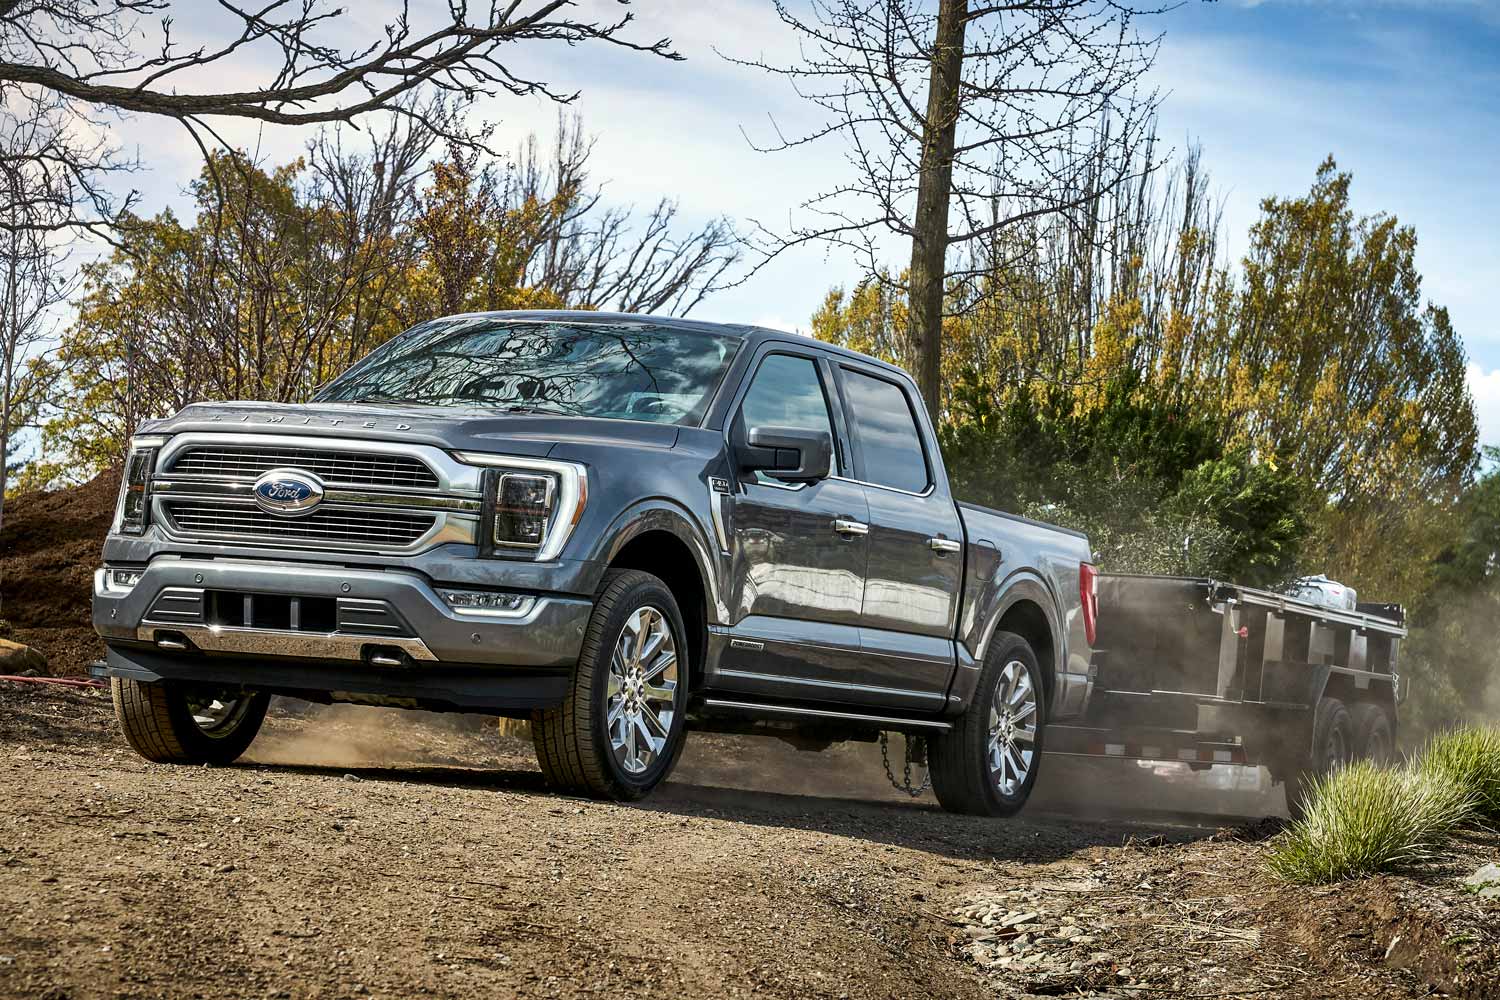 https://autoimage.capitalone.com/cms/Auto/assets/images/2546-hero-what-is-half-ton-pickup-truck-2021-ford-f-150.jpg